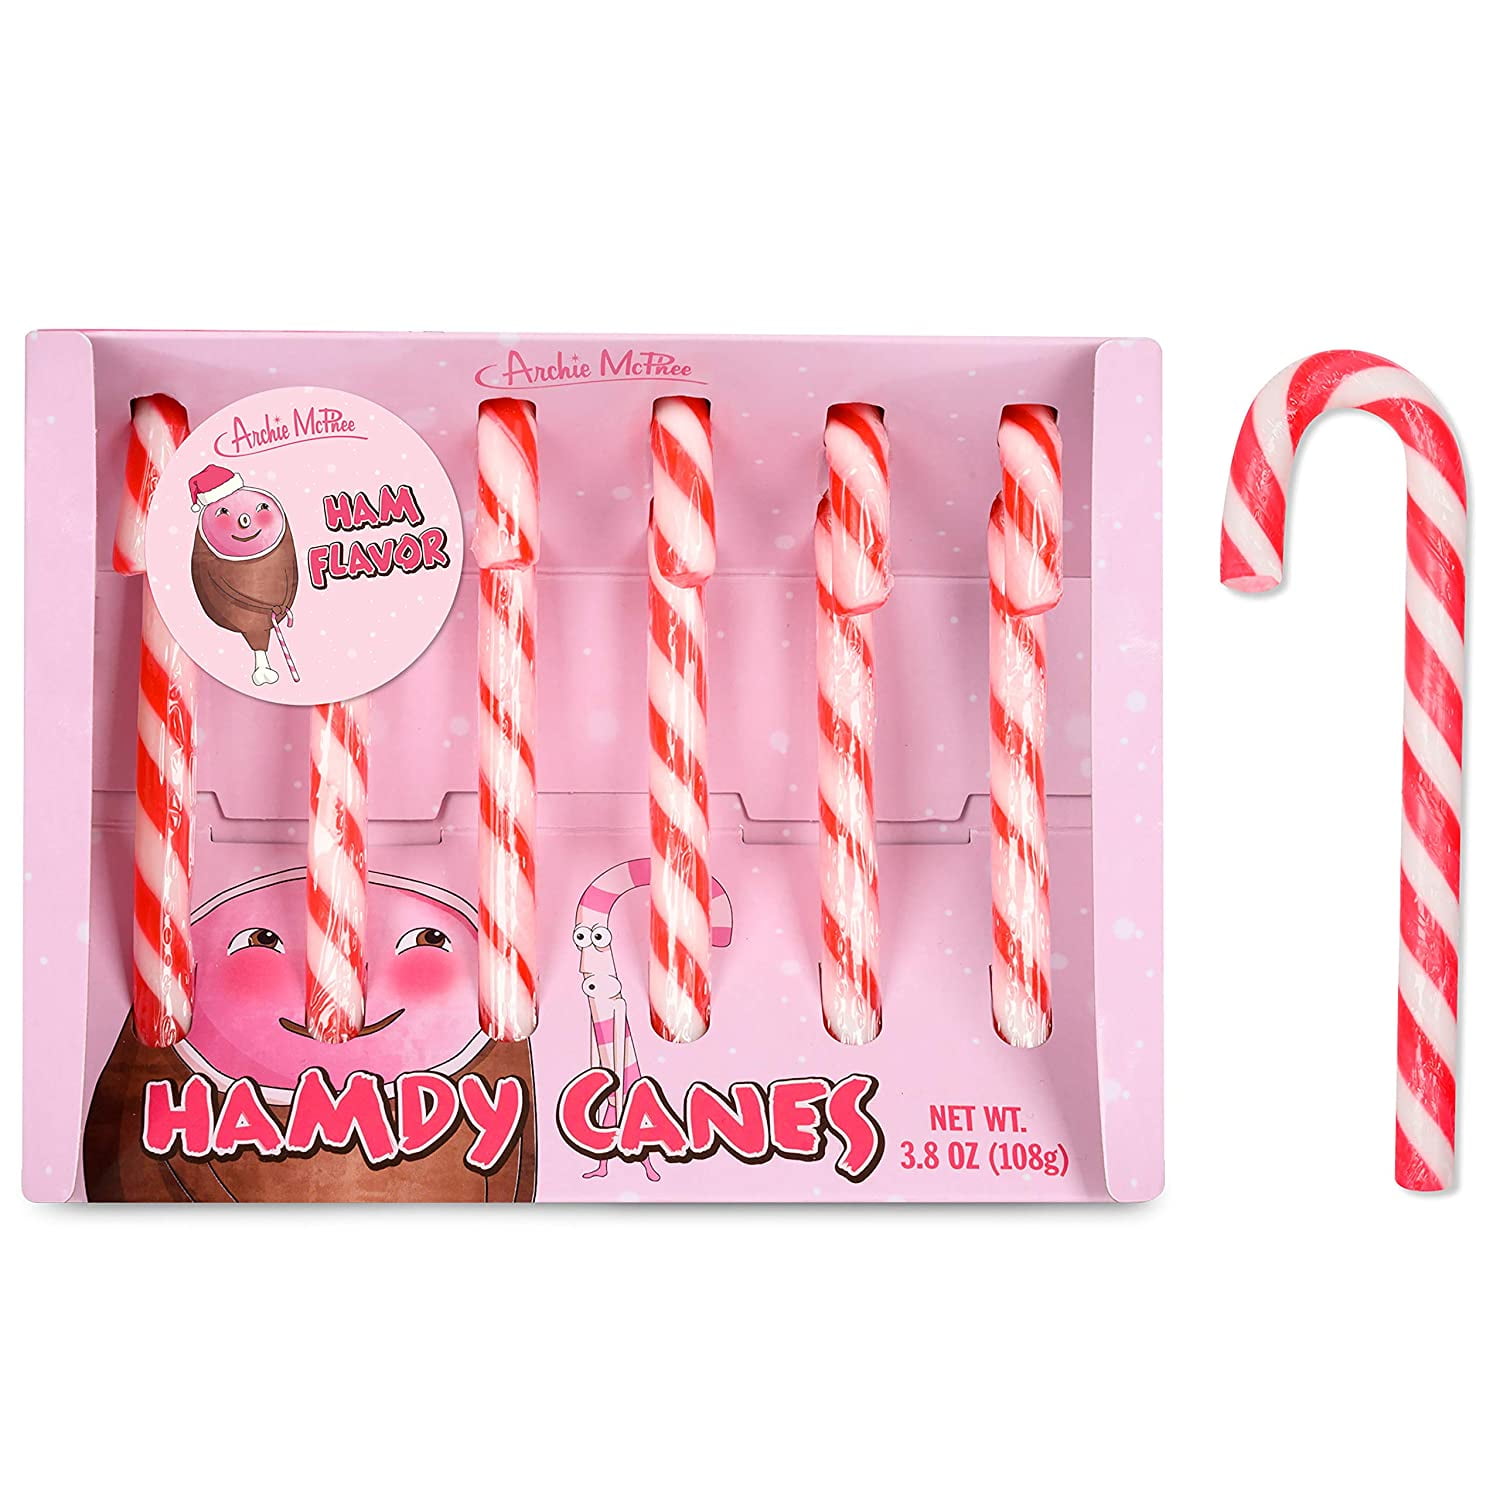 A Company is Selling ‘Mac and Cheese Candy Canes’ This Holiday Season